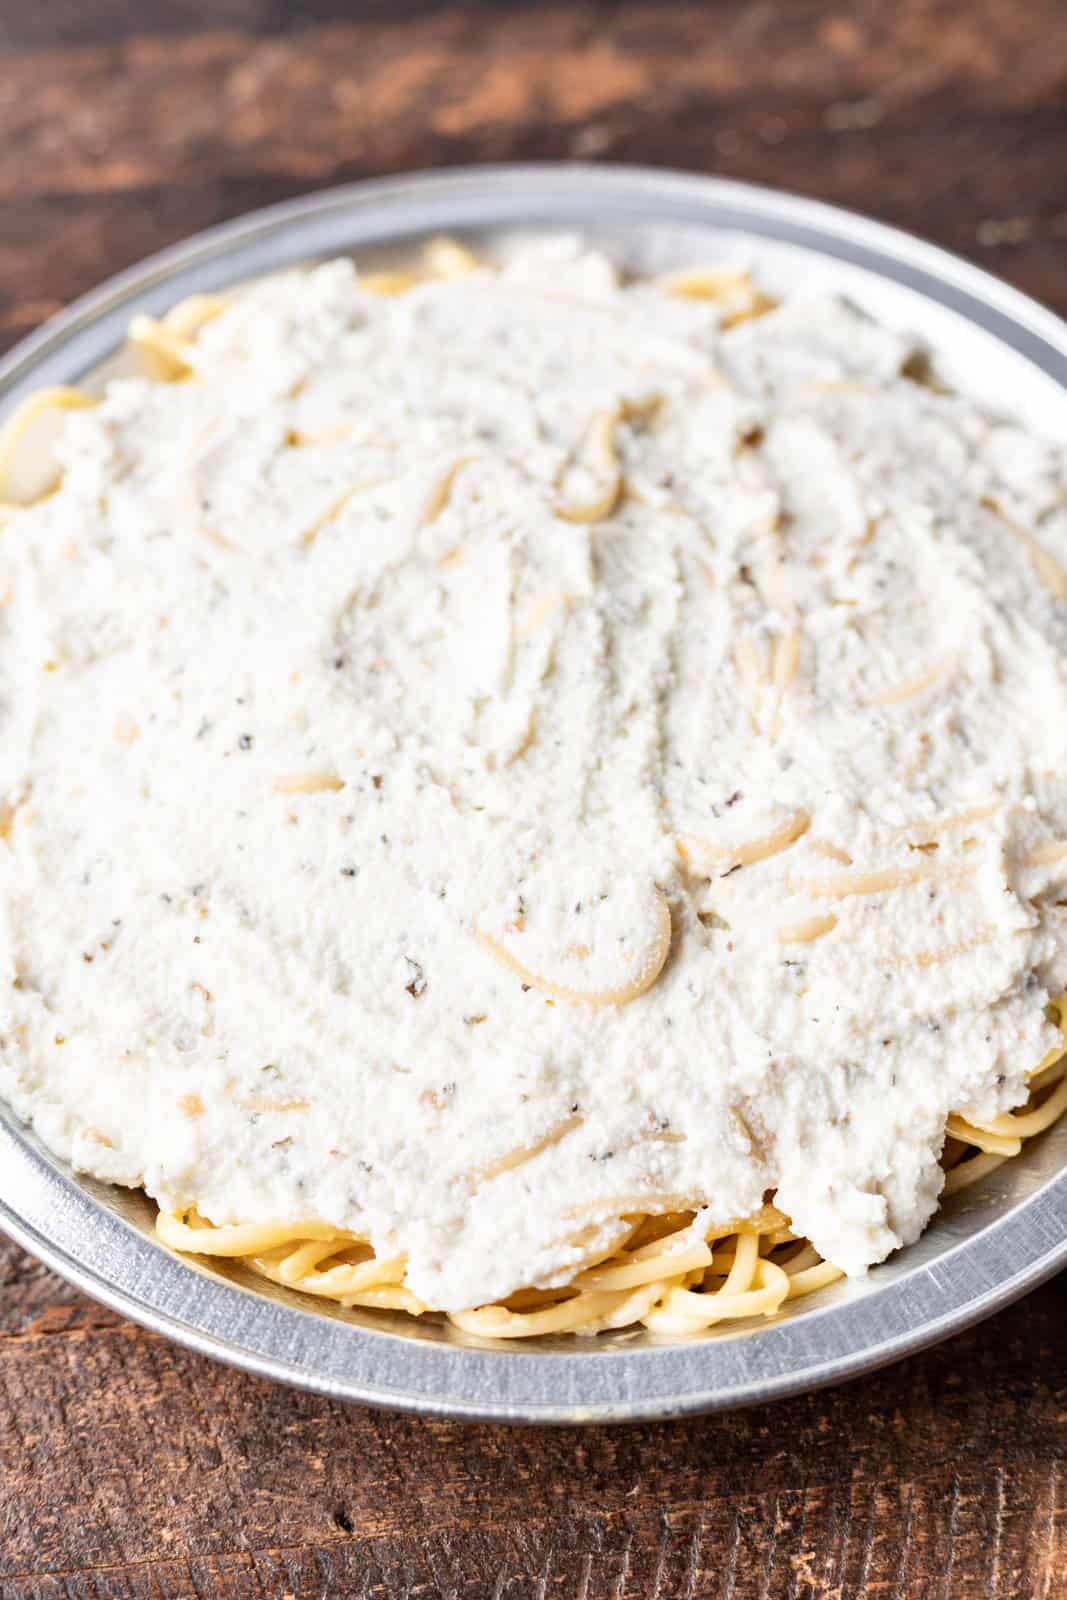 ricotta cheese spread over baked spaghetti noodles in a pan.